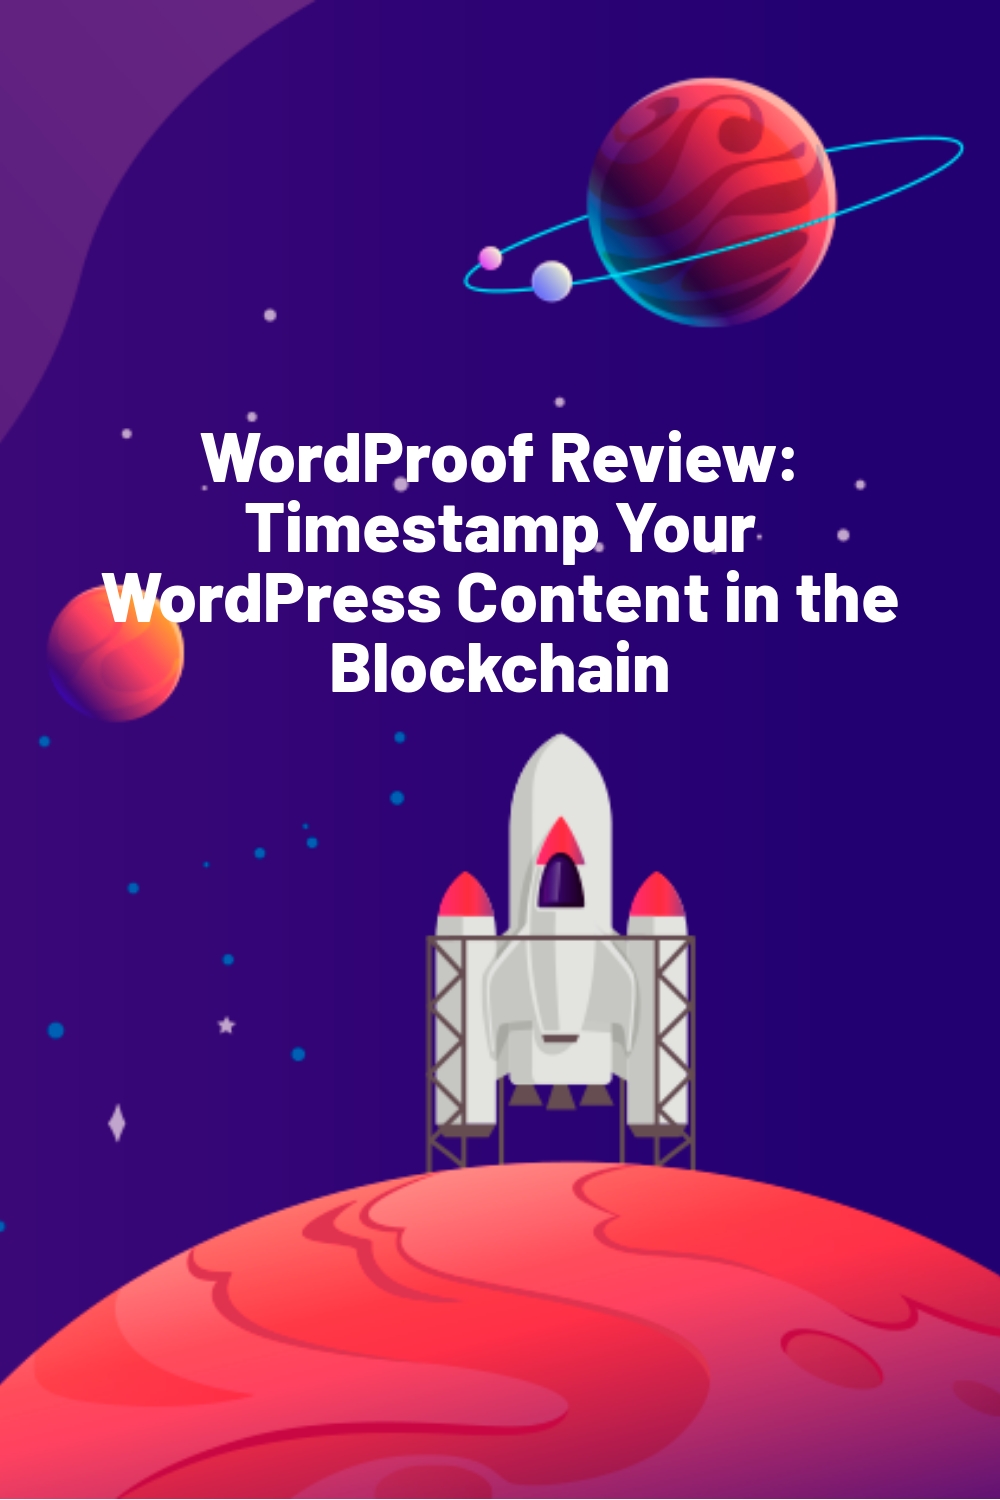 WordProof Review: Timestamp Your WordPress Content in the Blockchain